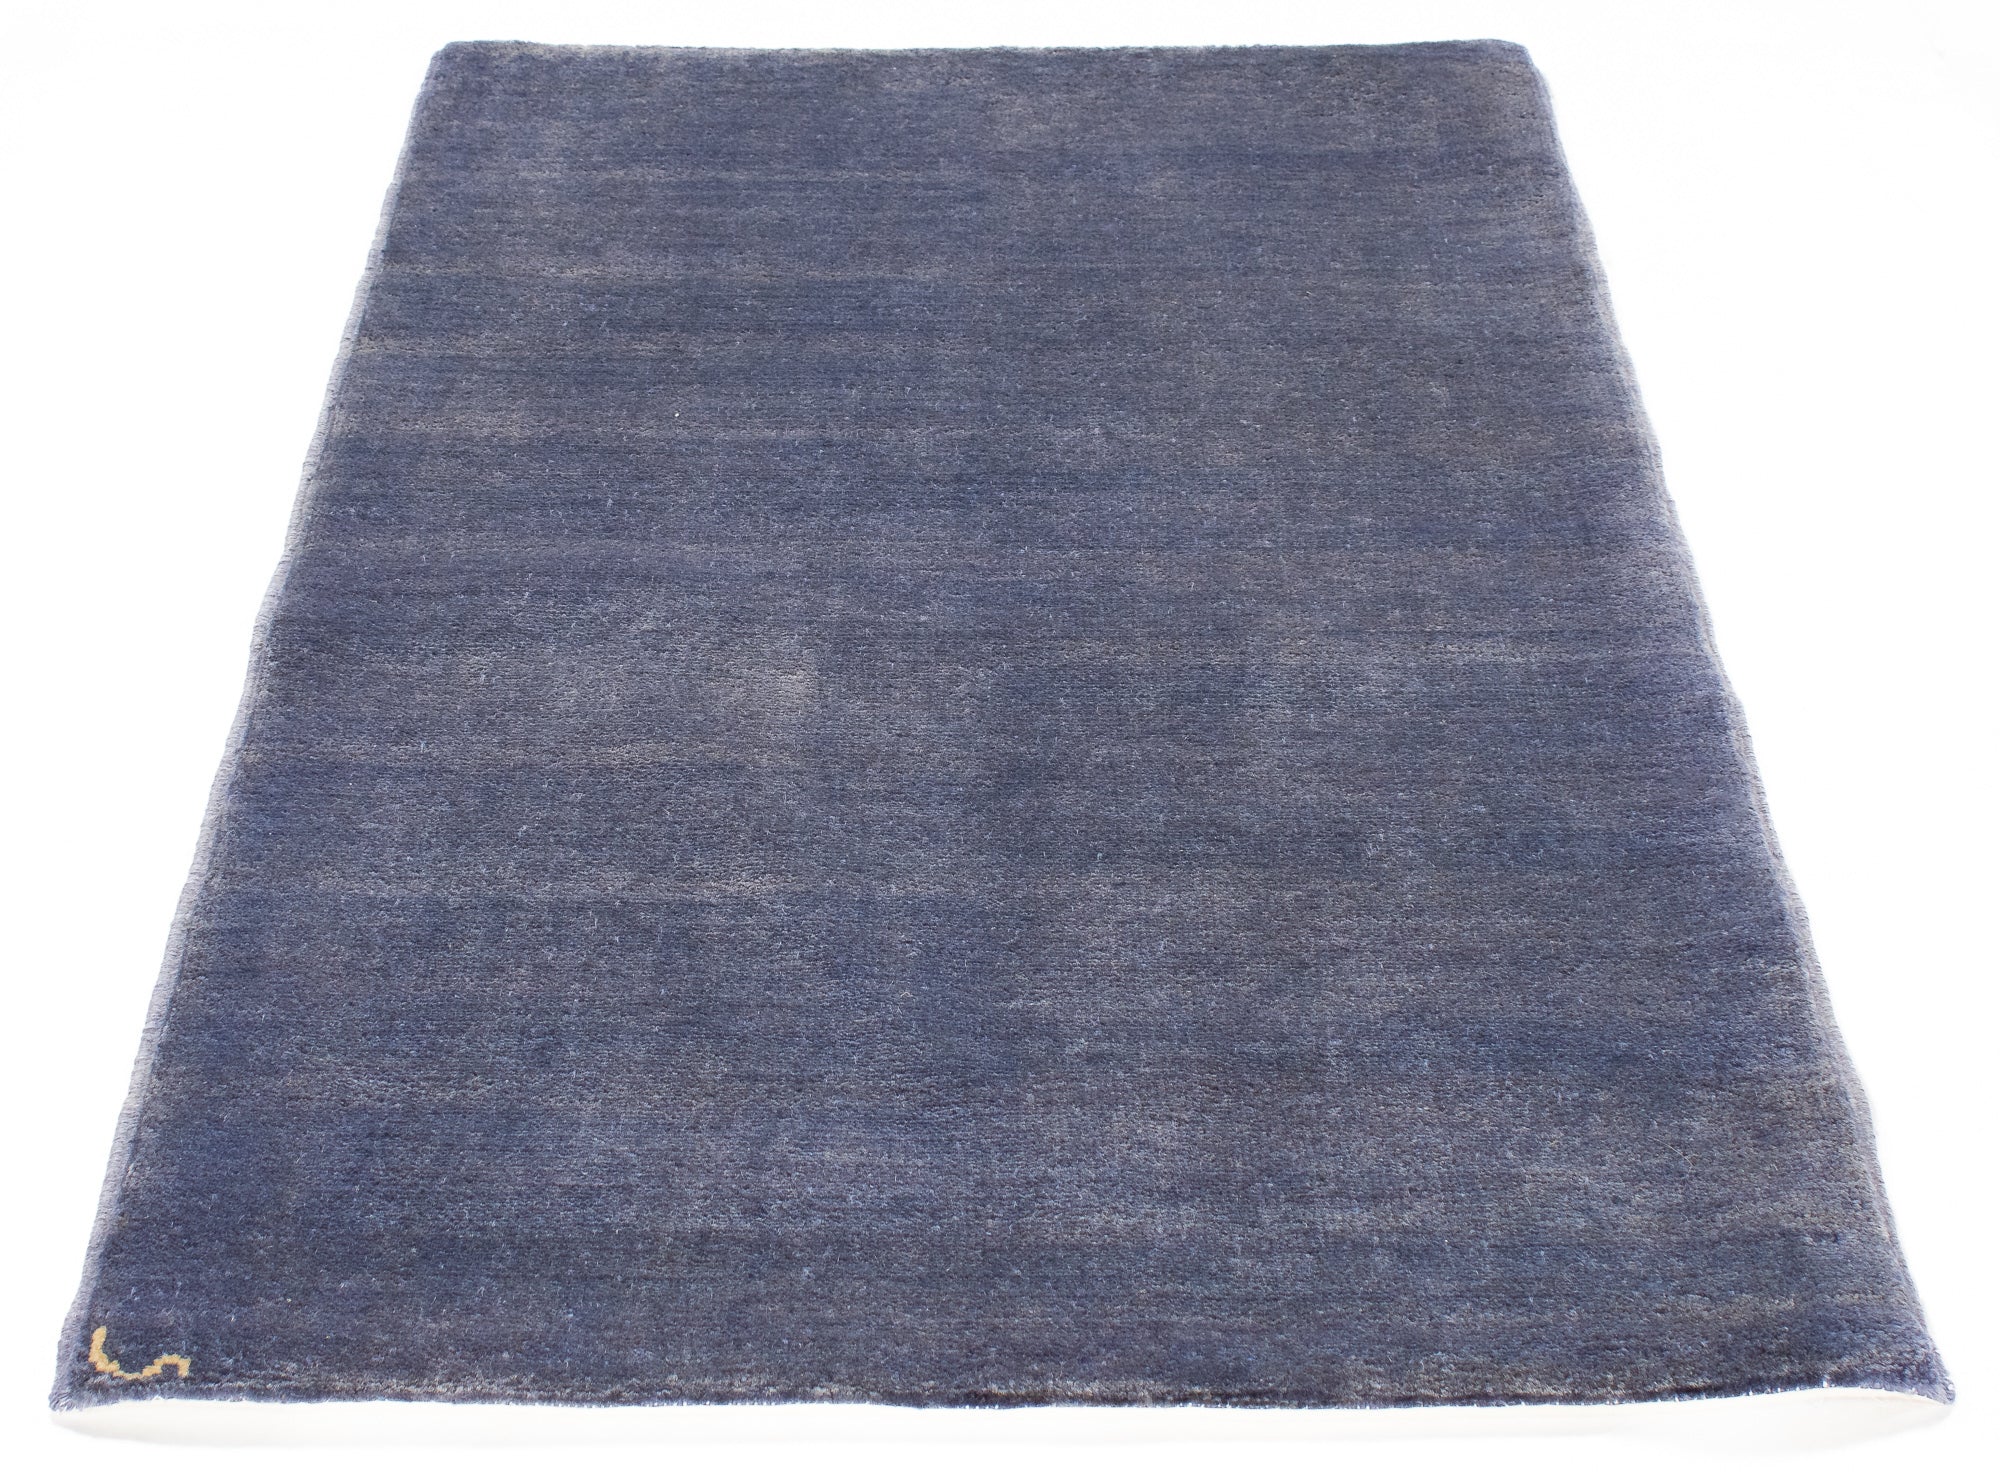 Afghanistan Accent Rug <br> 2'4 x 3'11